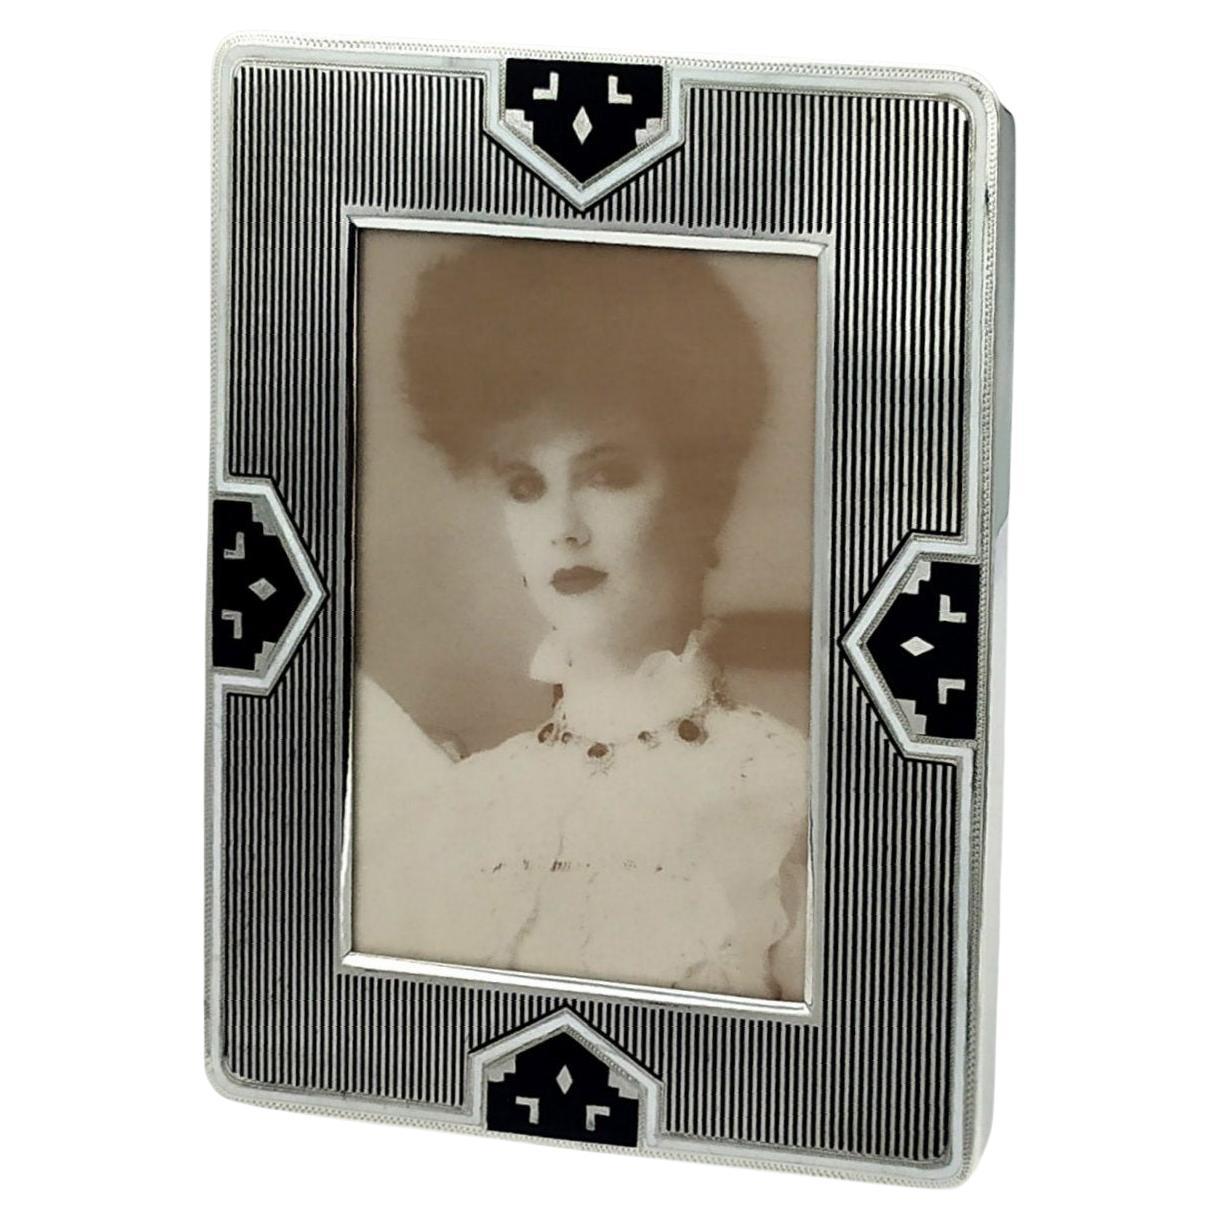 Photo Frame Art Deco Design Inspired by Louis Cartier Sterling Silver Salimbeni